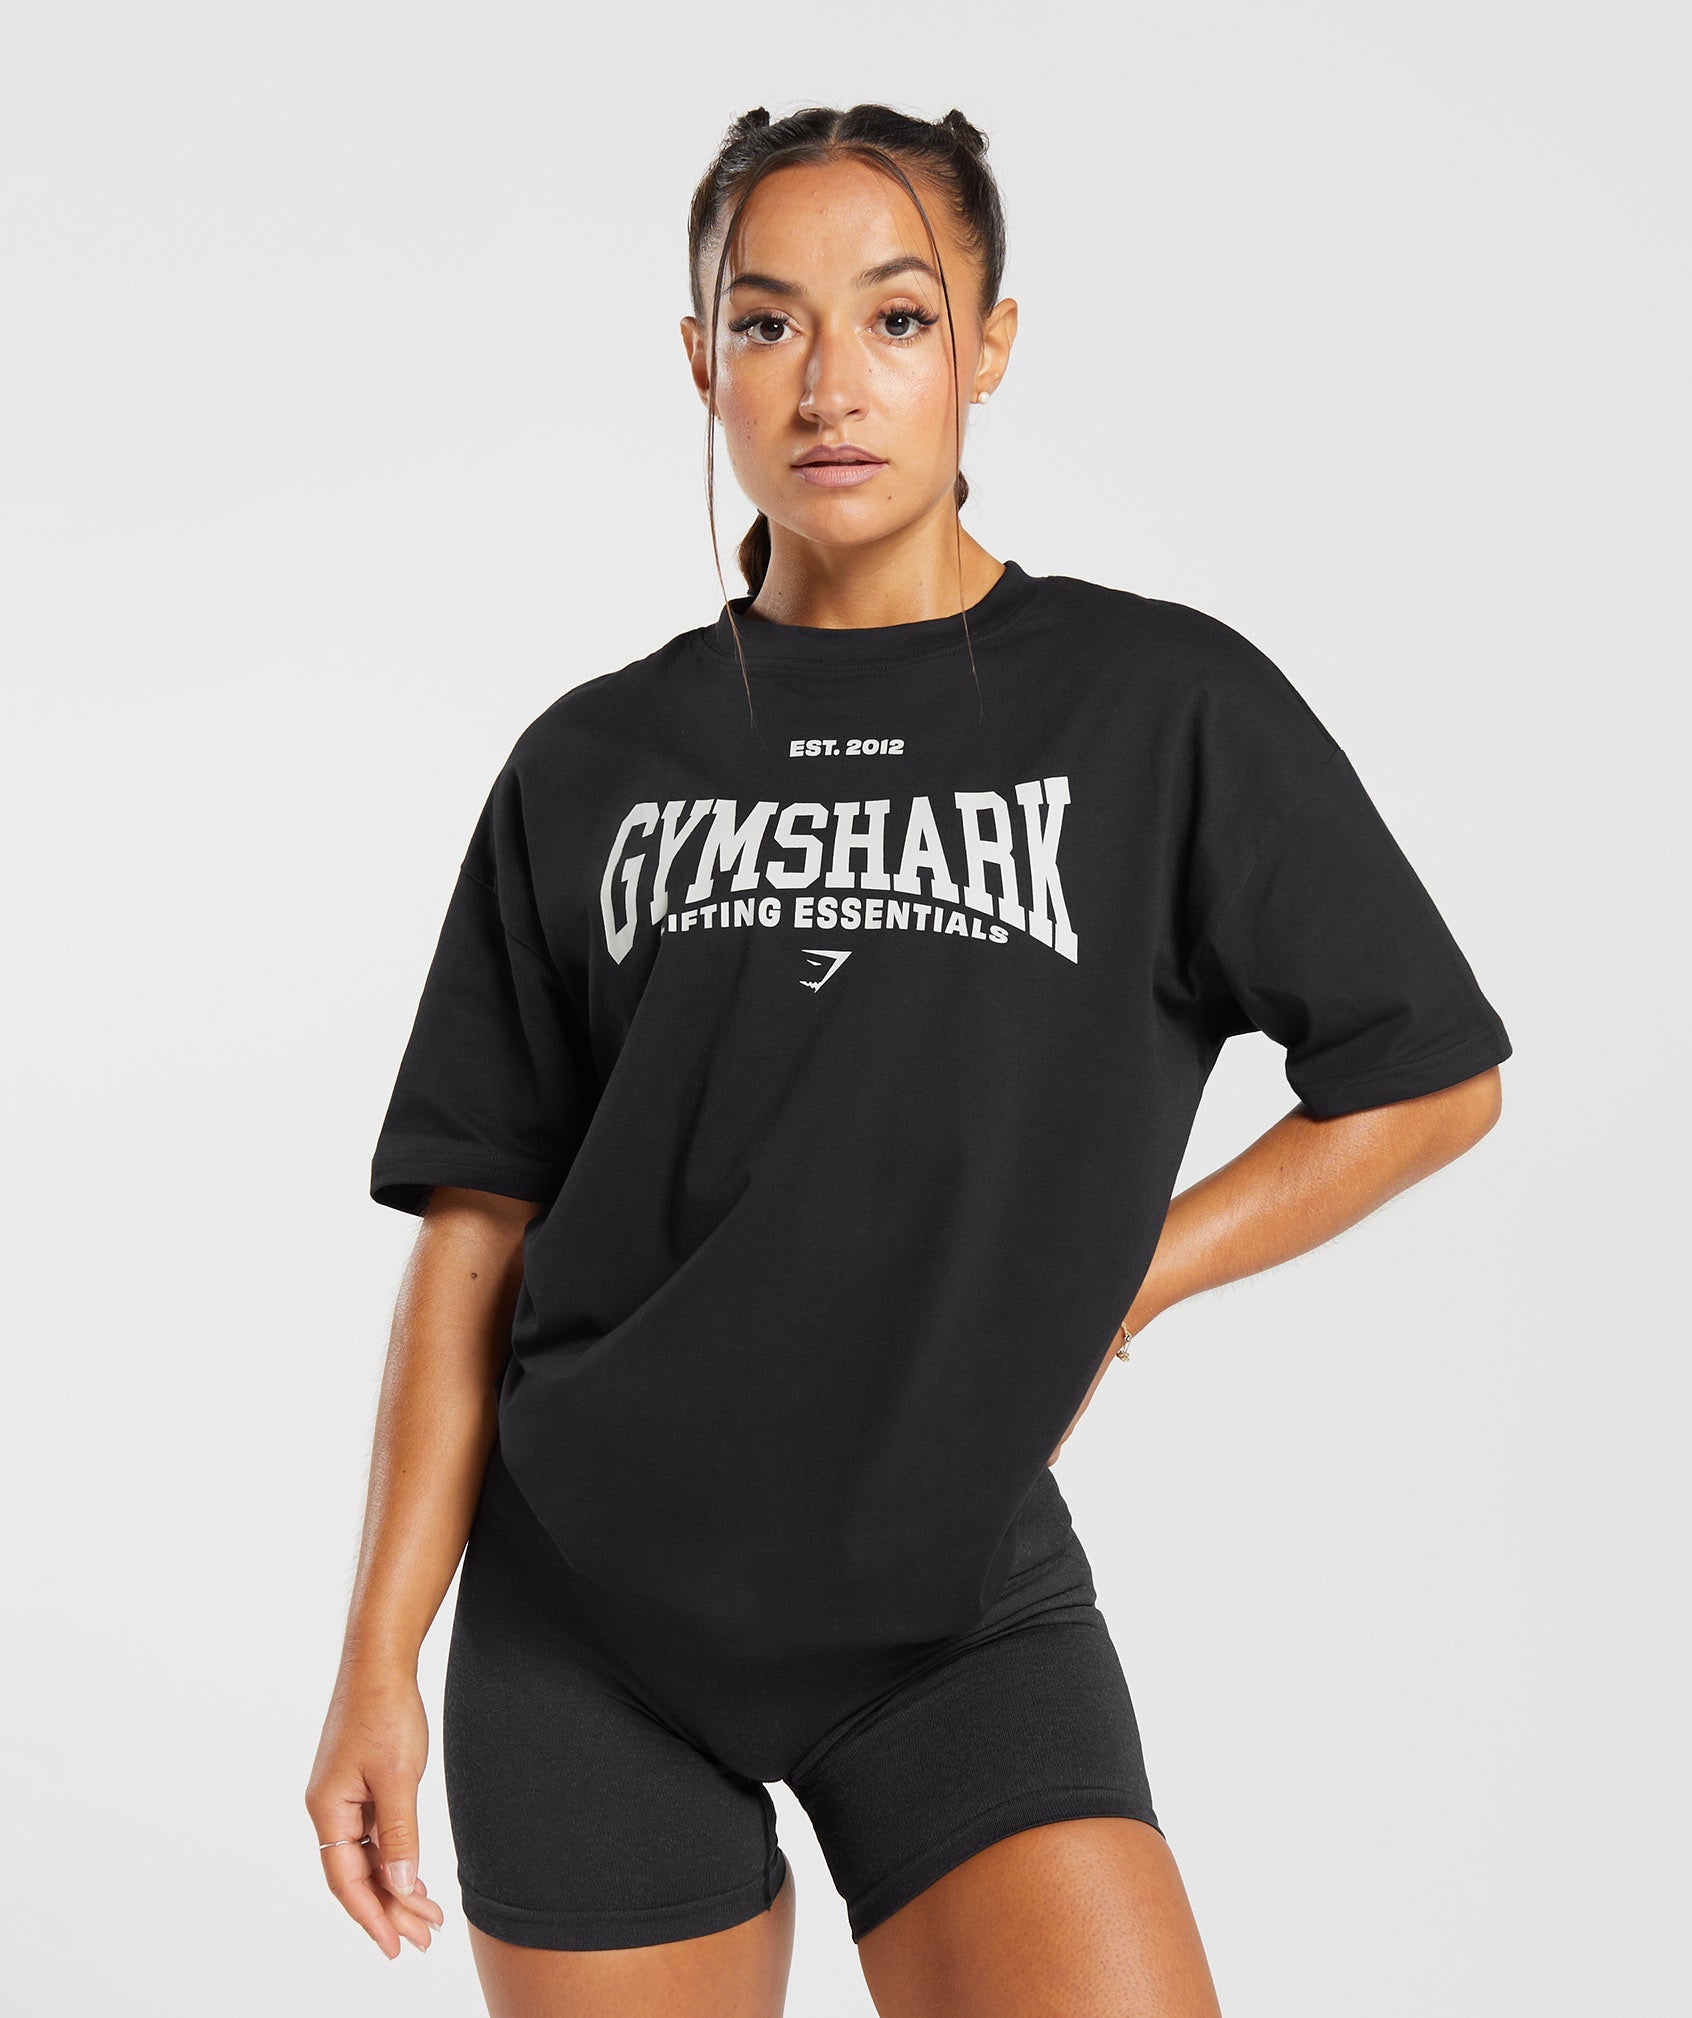 Lifting Essentials Oversized T-shirt in Black - view 1